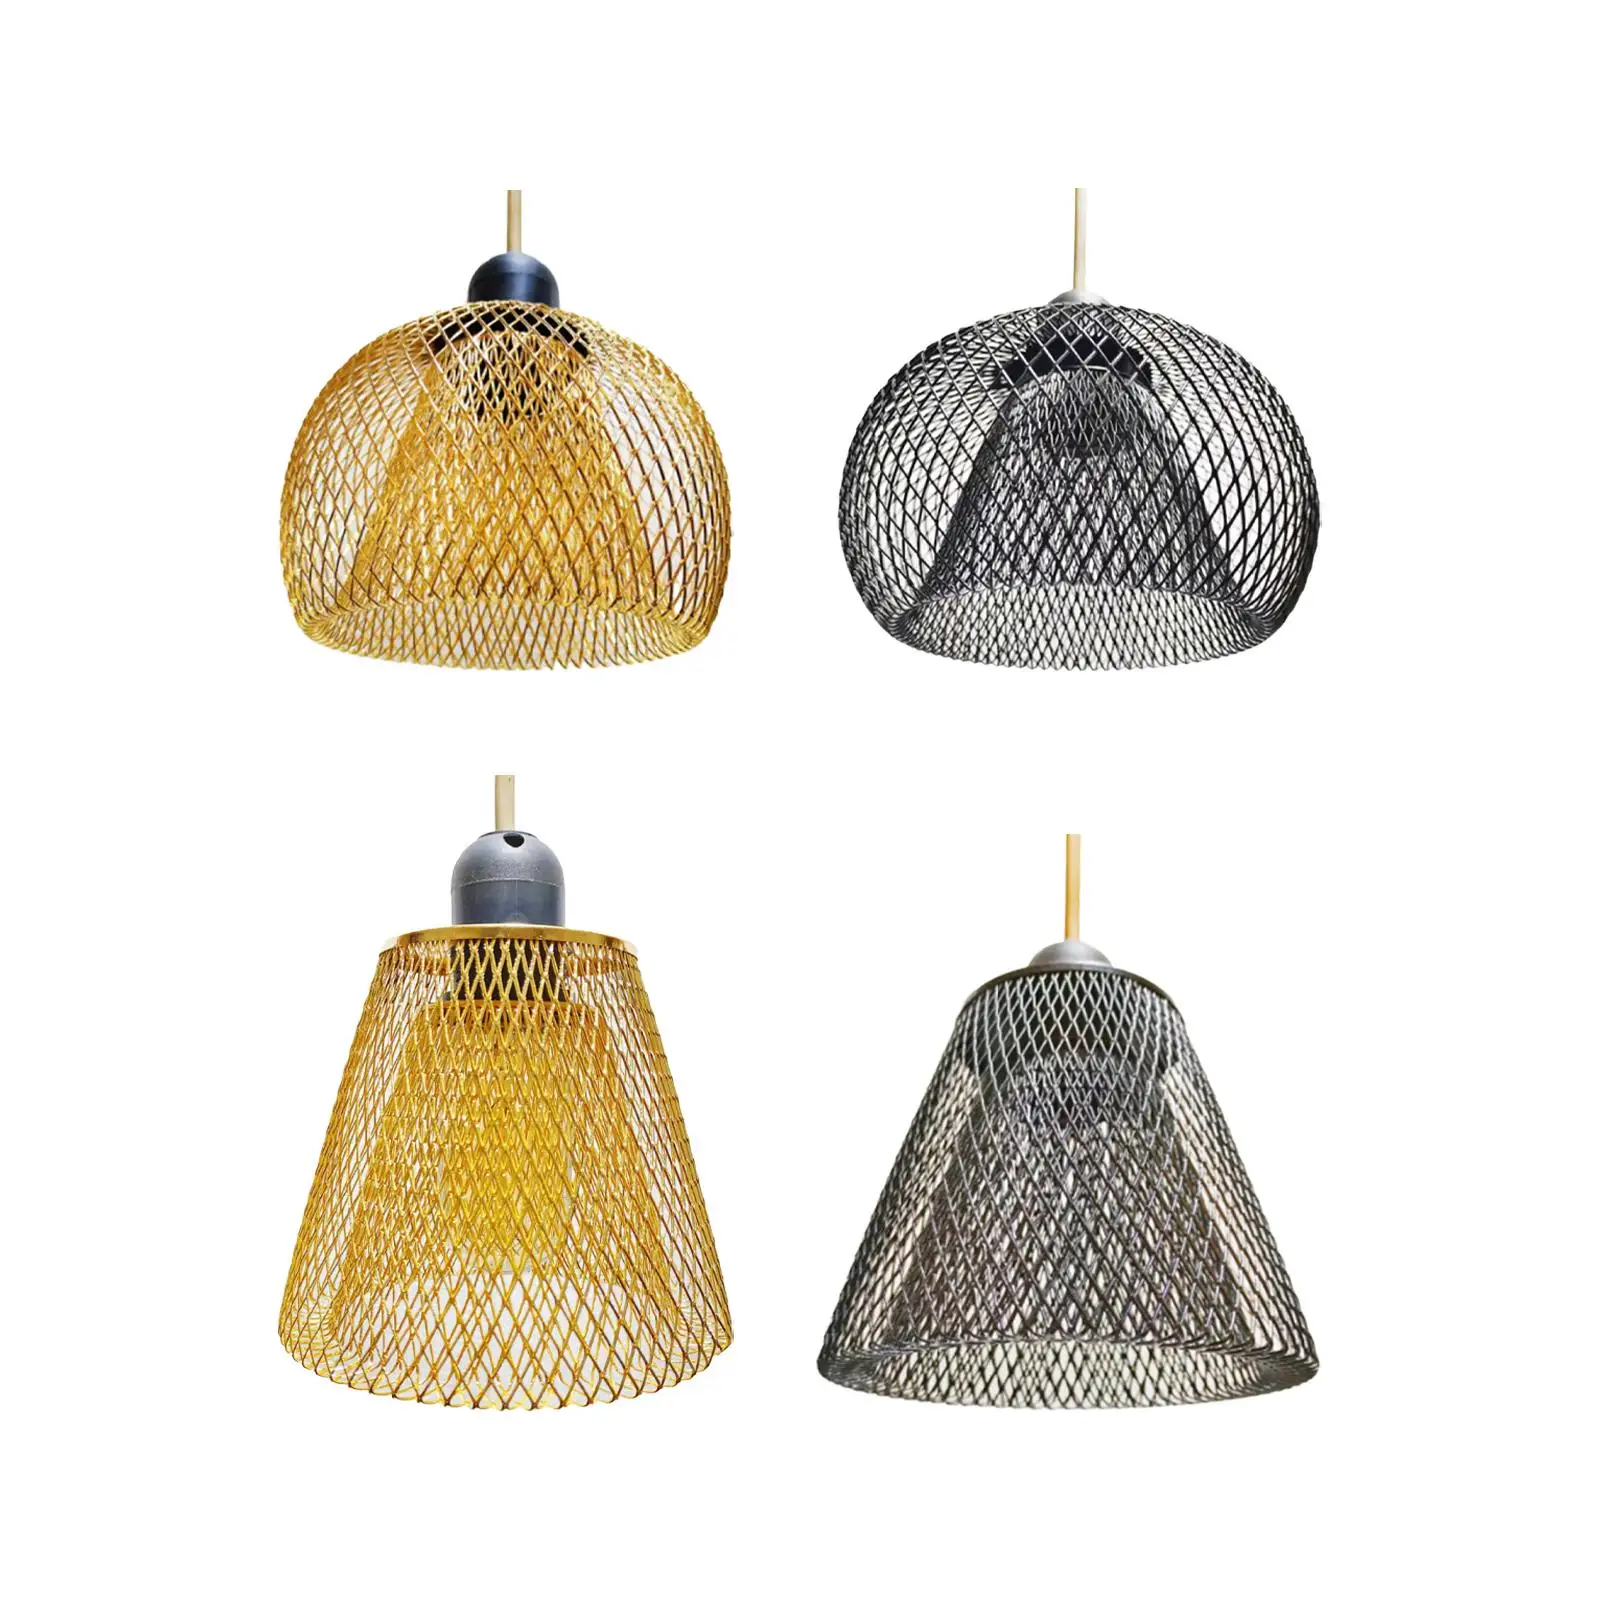 Metal Pendant Lamp Shade Retro Pendant Light Cover for Hotel Bedroom Dining